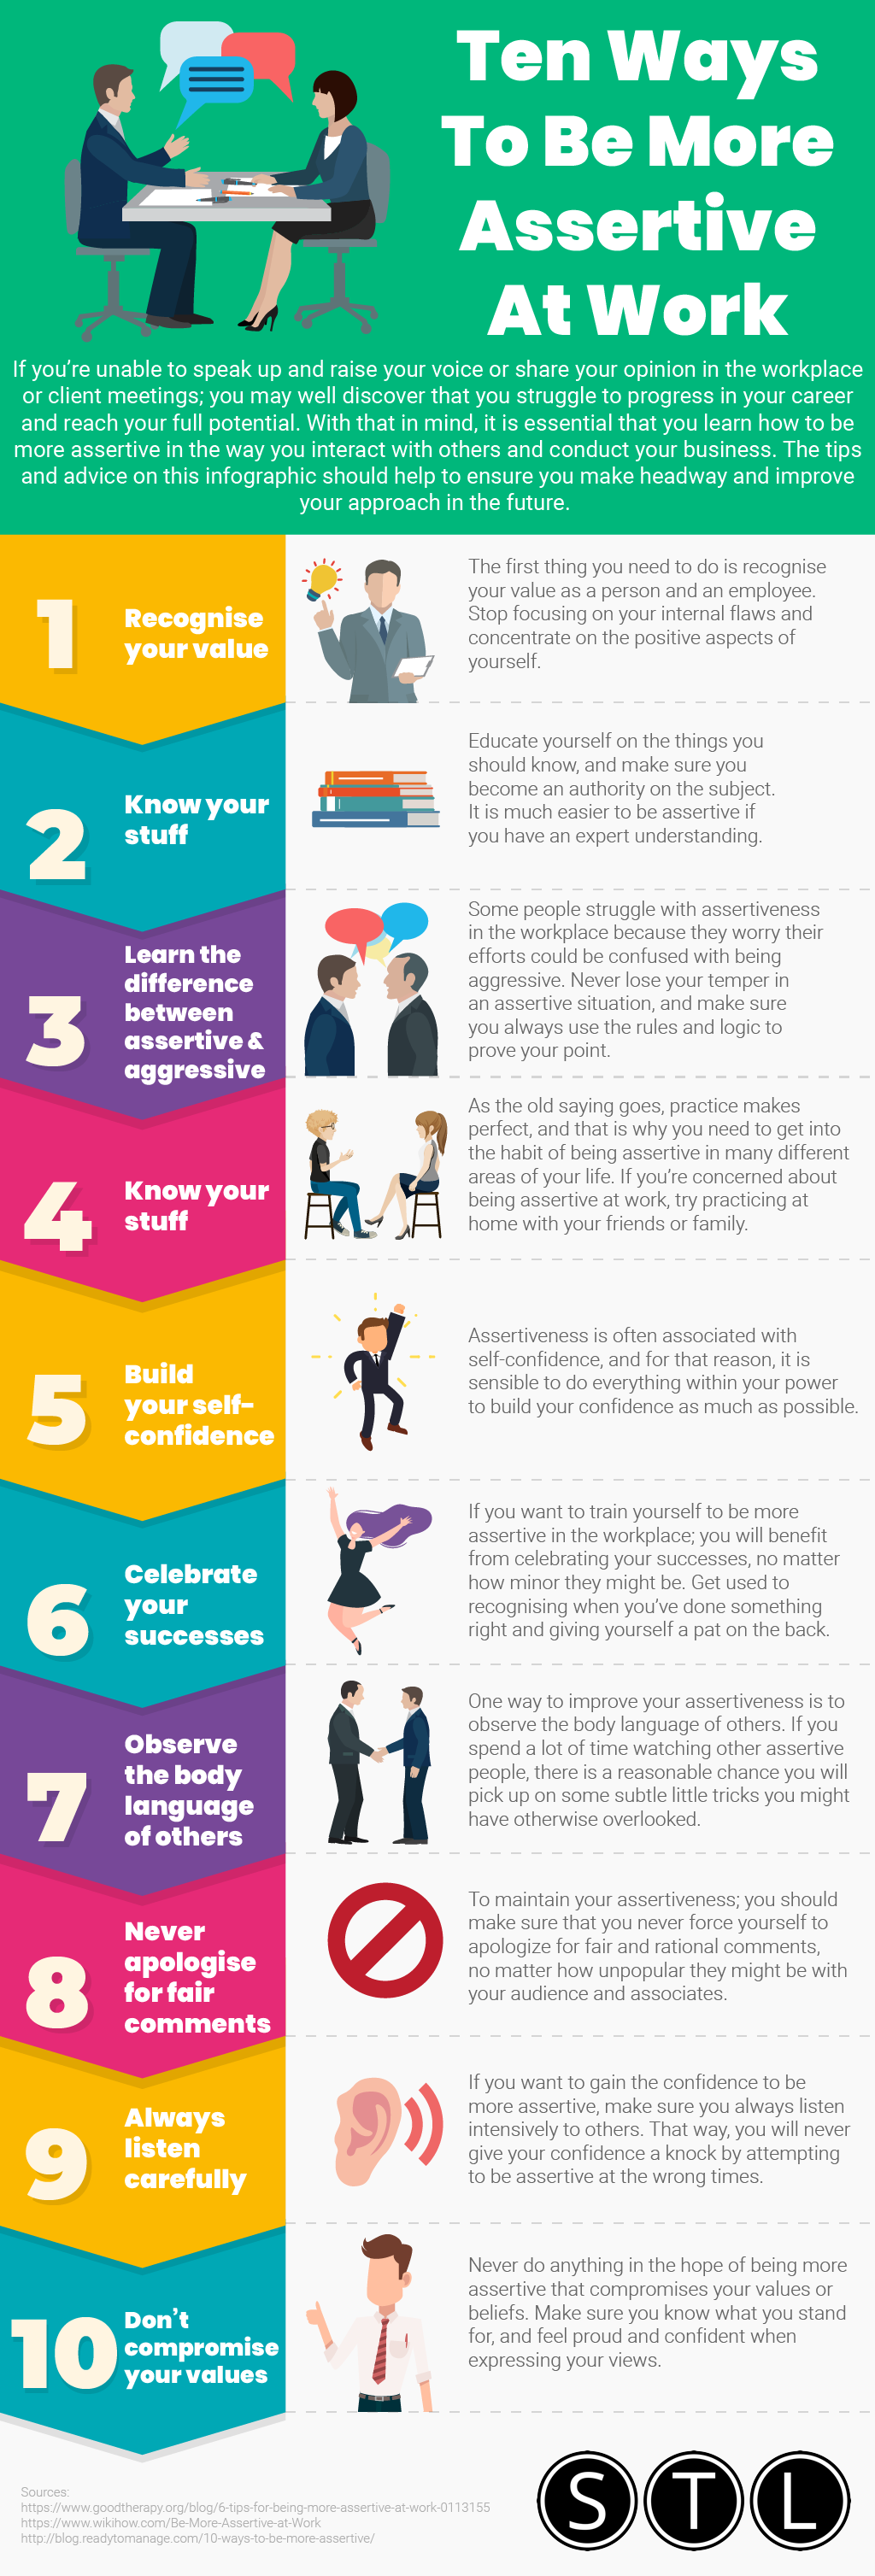 Ten Ways to be more Assertive at Work